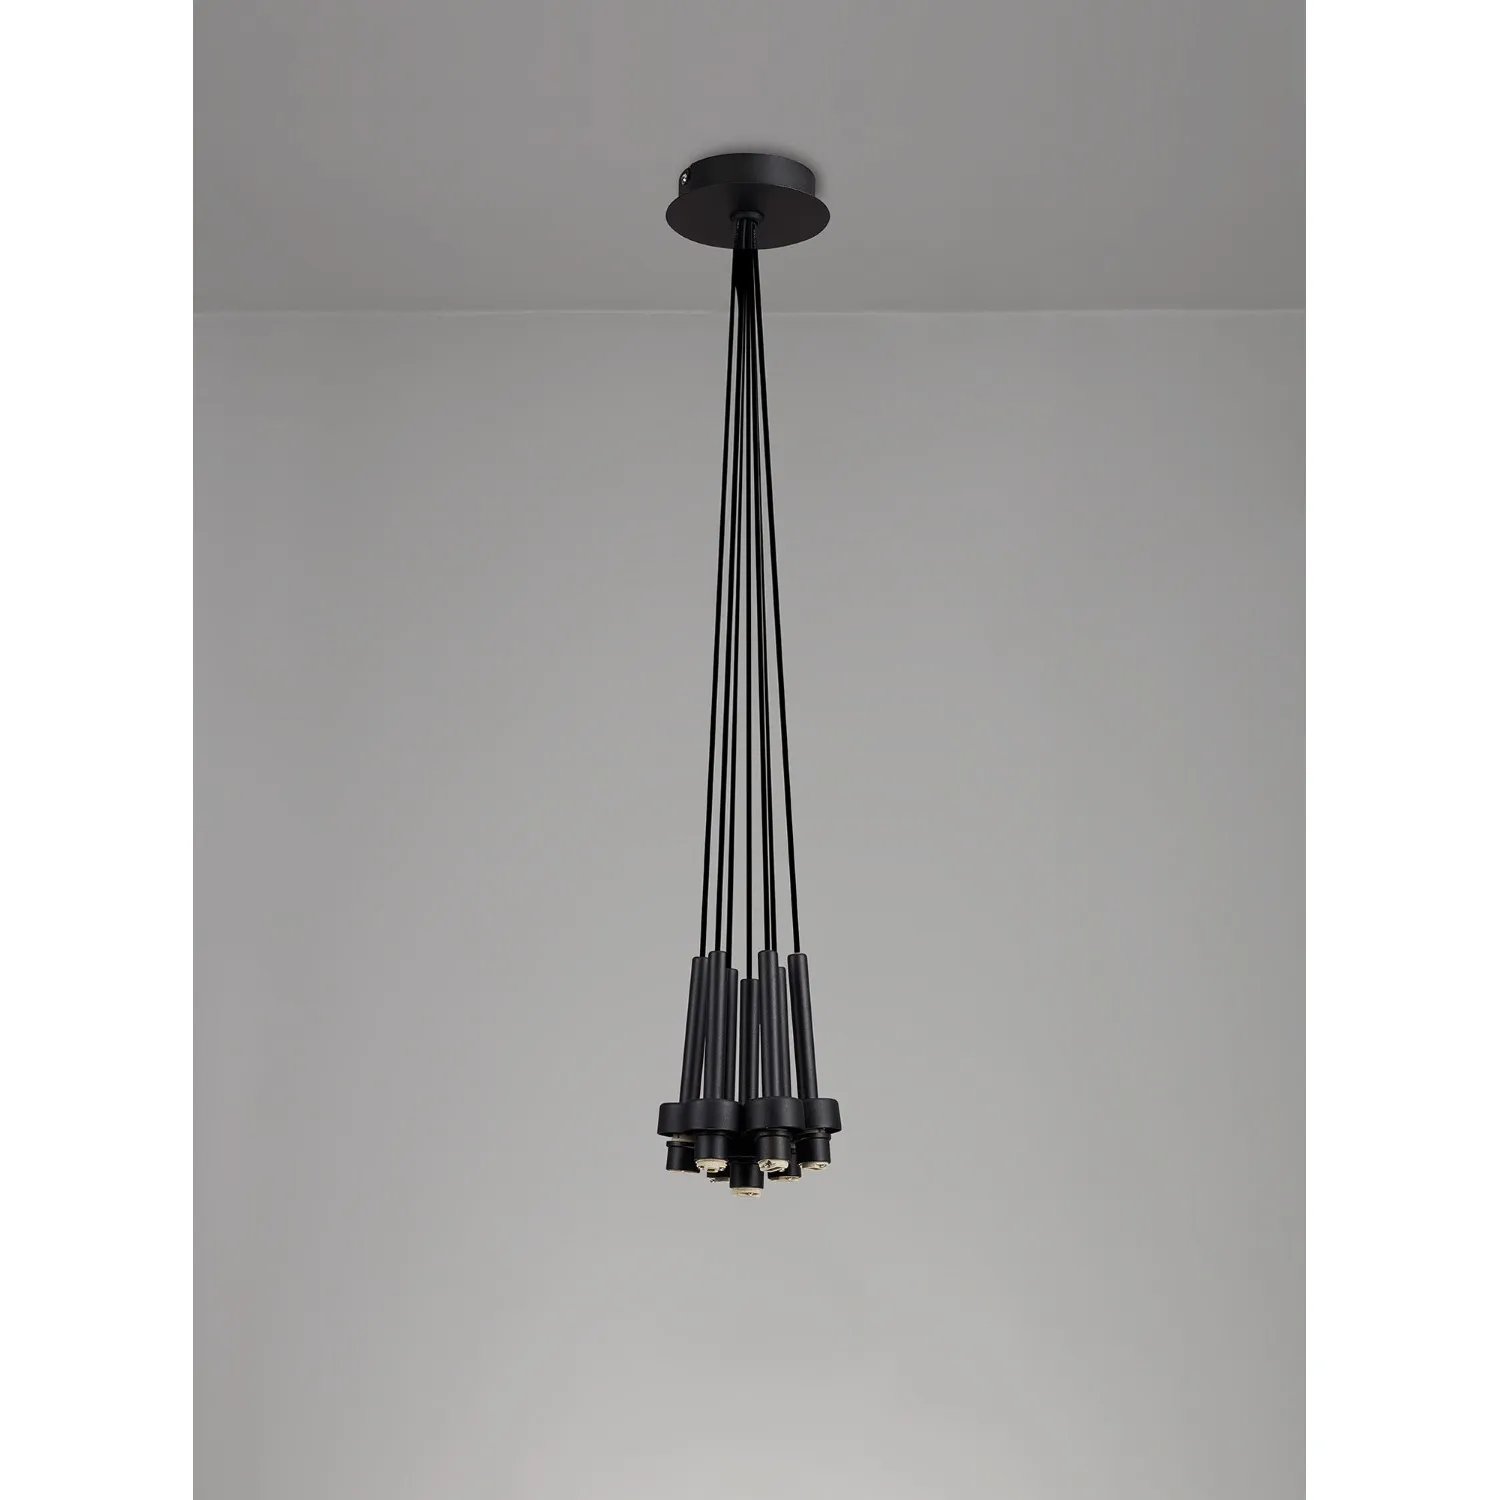 Abingdon Satin Black 7 Light G9 Universal 1.5m Cluster Pendant, Suitable For A Vast Selection Of Glass Shades